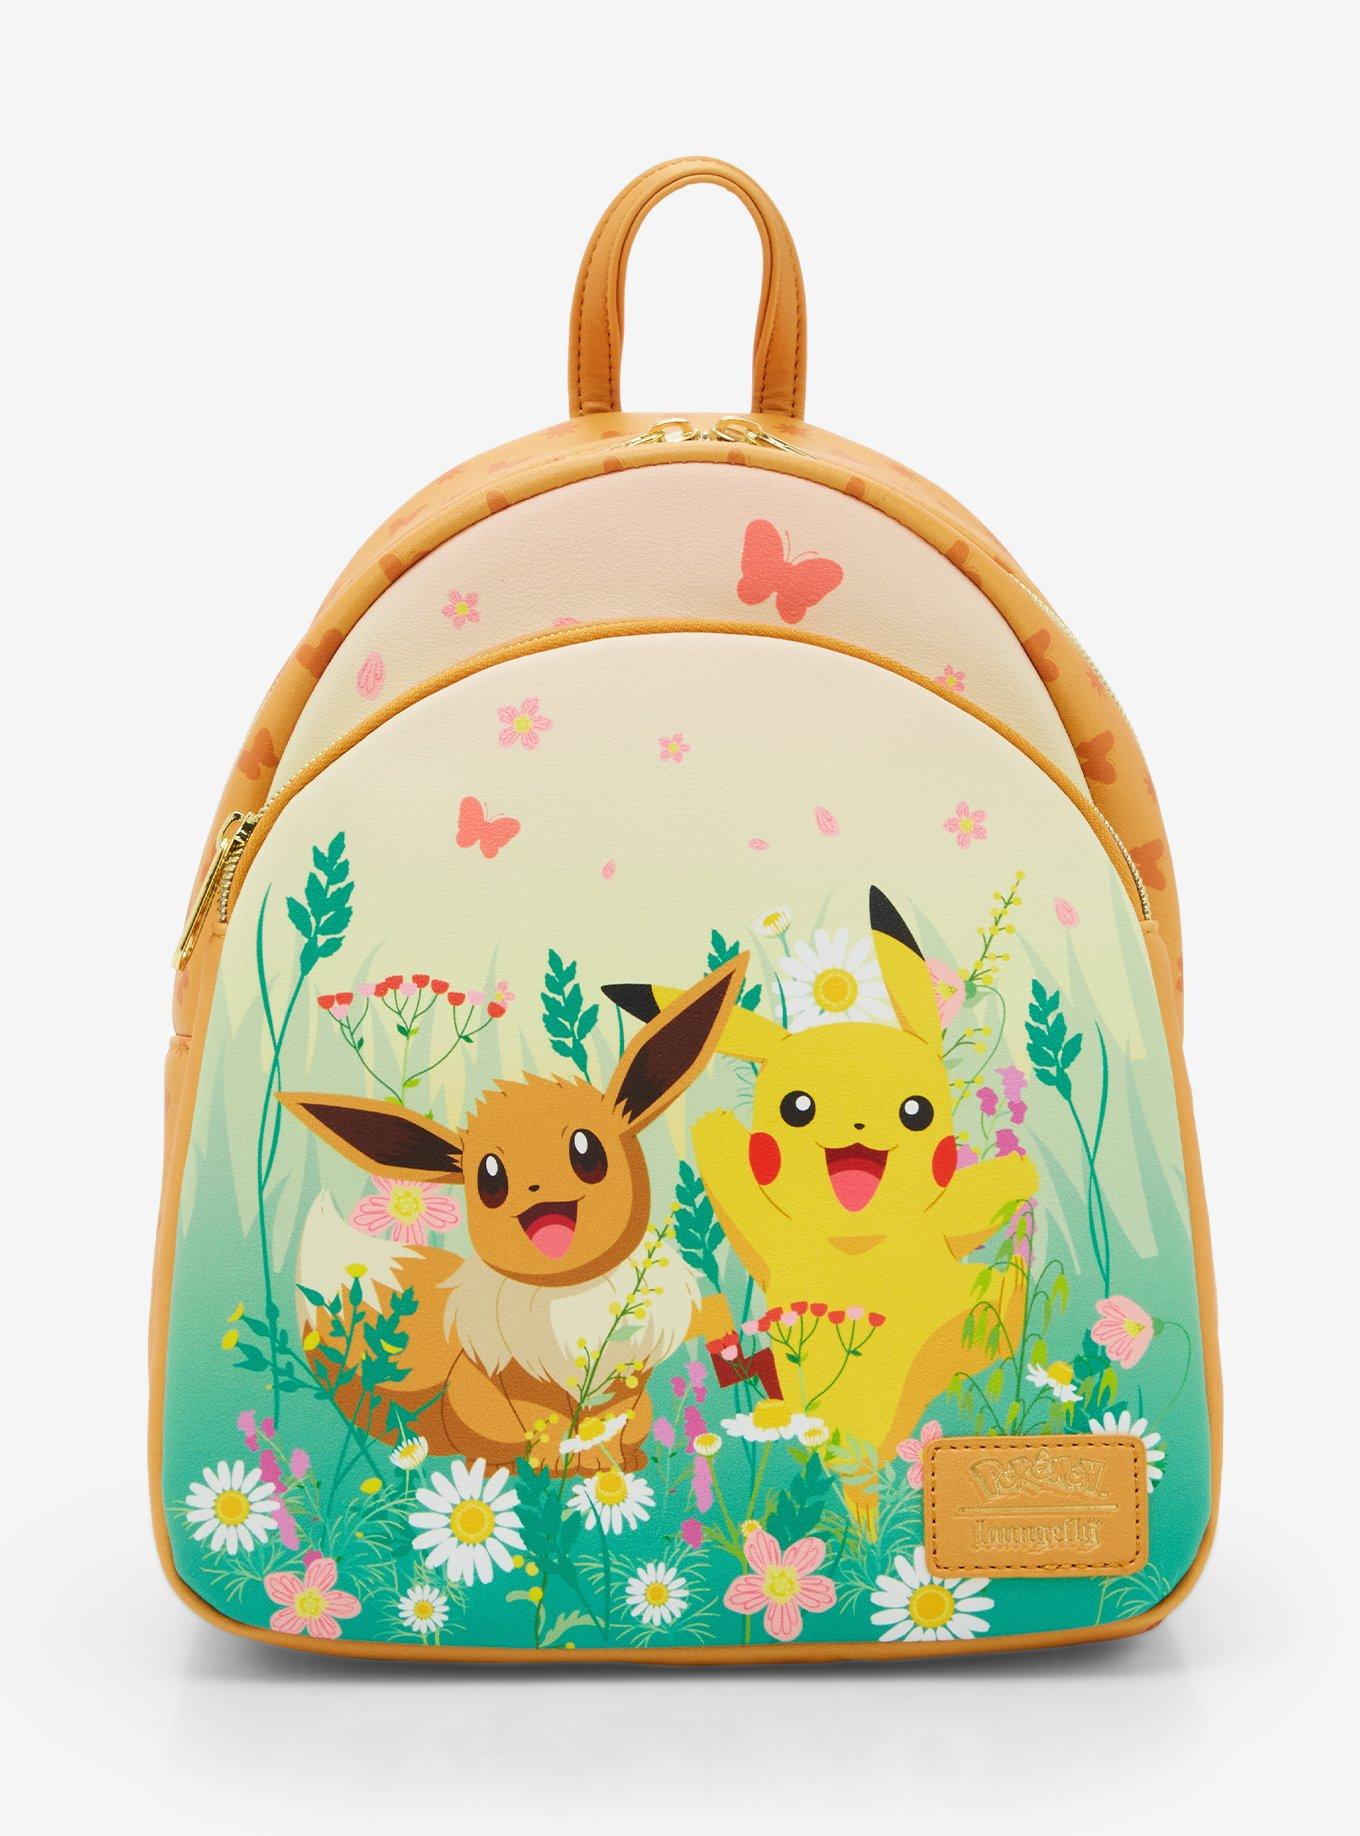 pokemon pikachu with butterflies and a scarf sitting on the ground